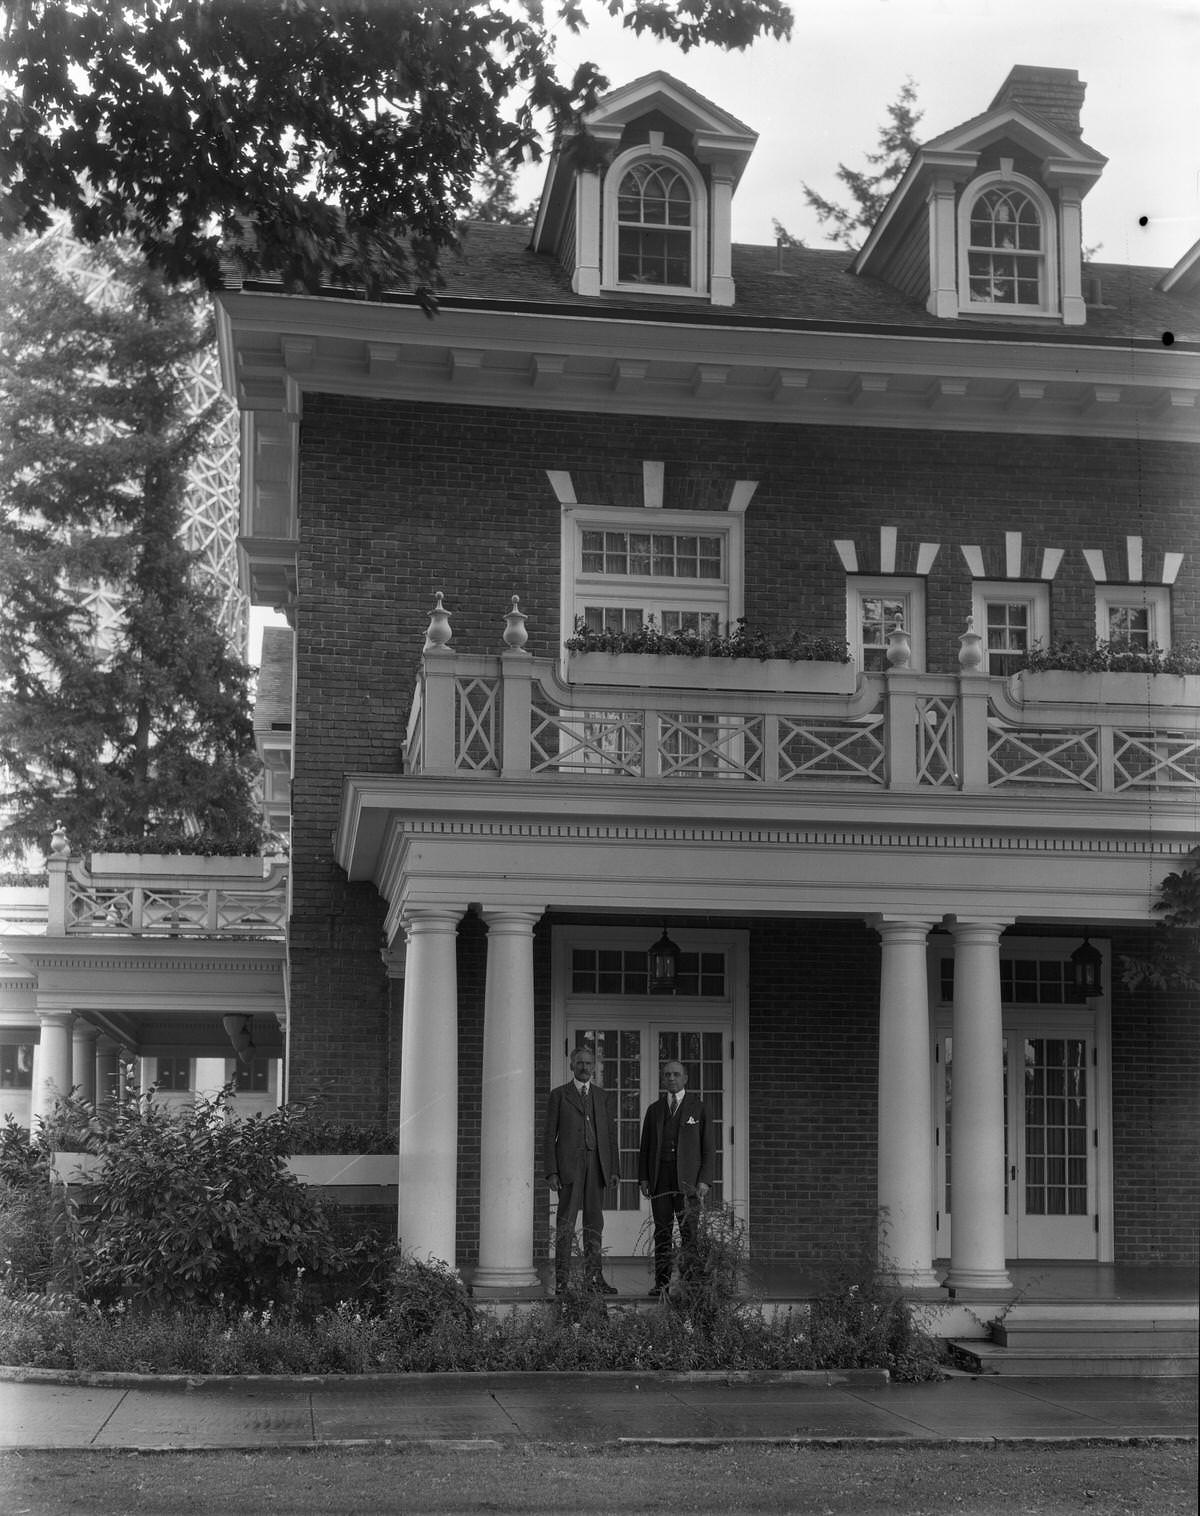 Governor Hartley and another man in front of the Governor's Mansion.